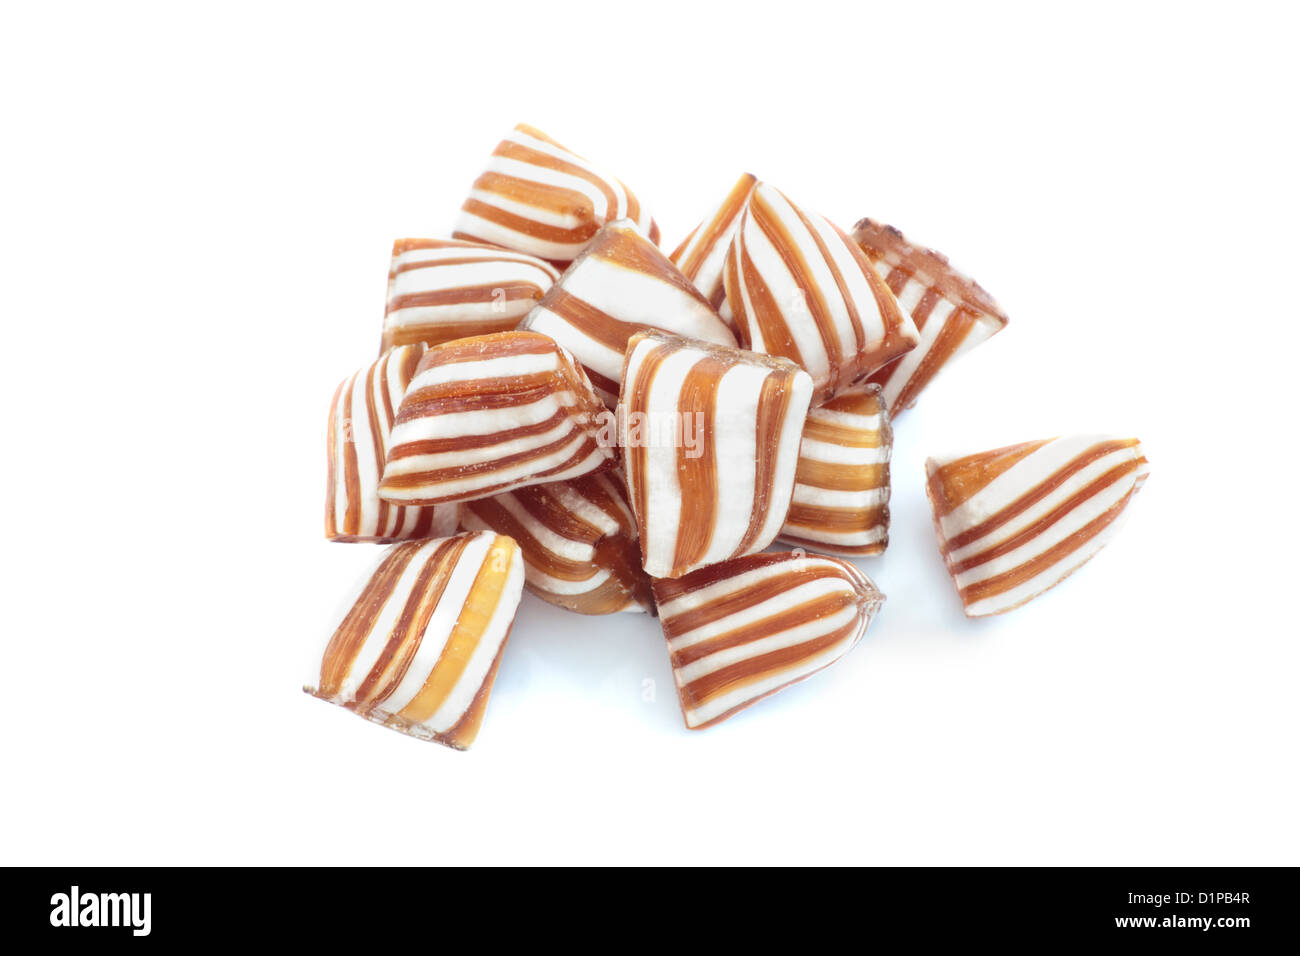 Striped humbugs isolated on a white background. Stock Photo